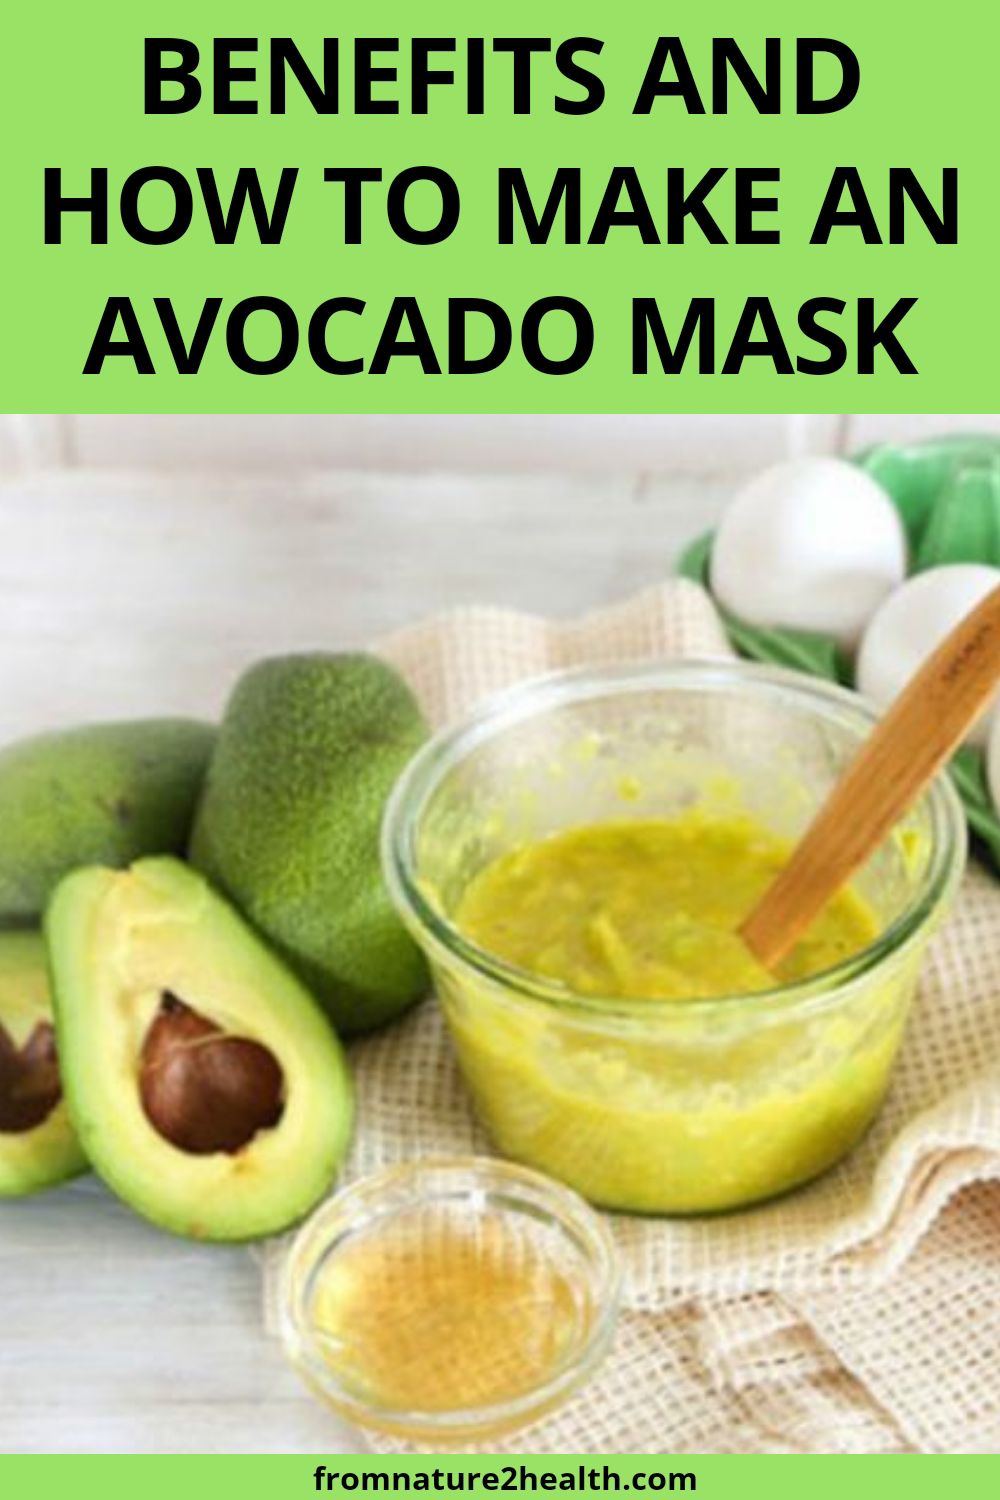 Benefits and How to Make an Avocado Mask